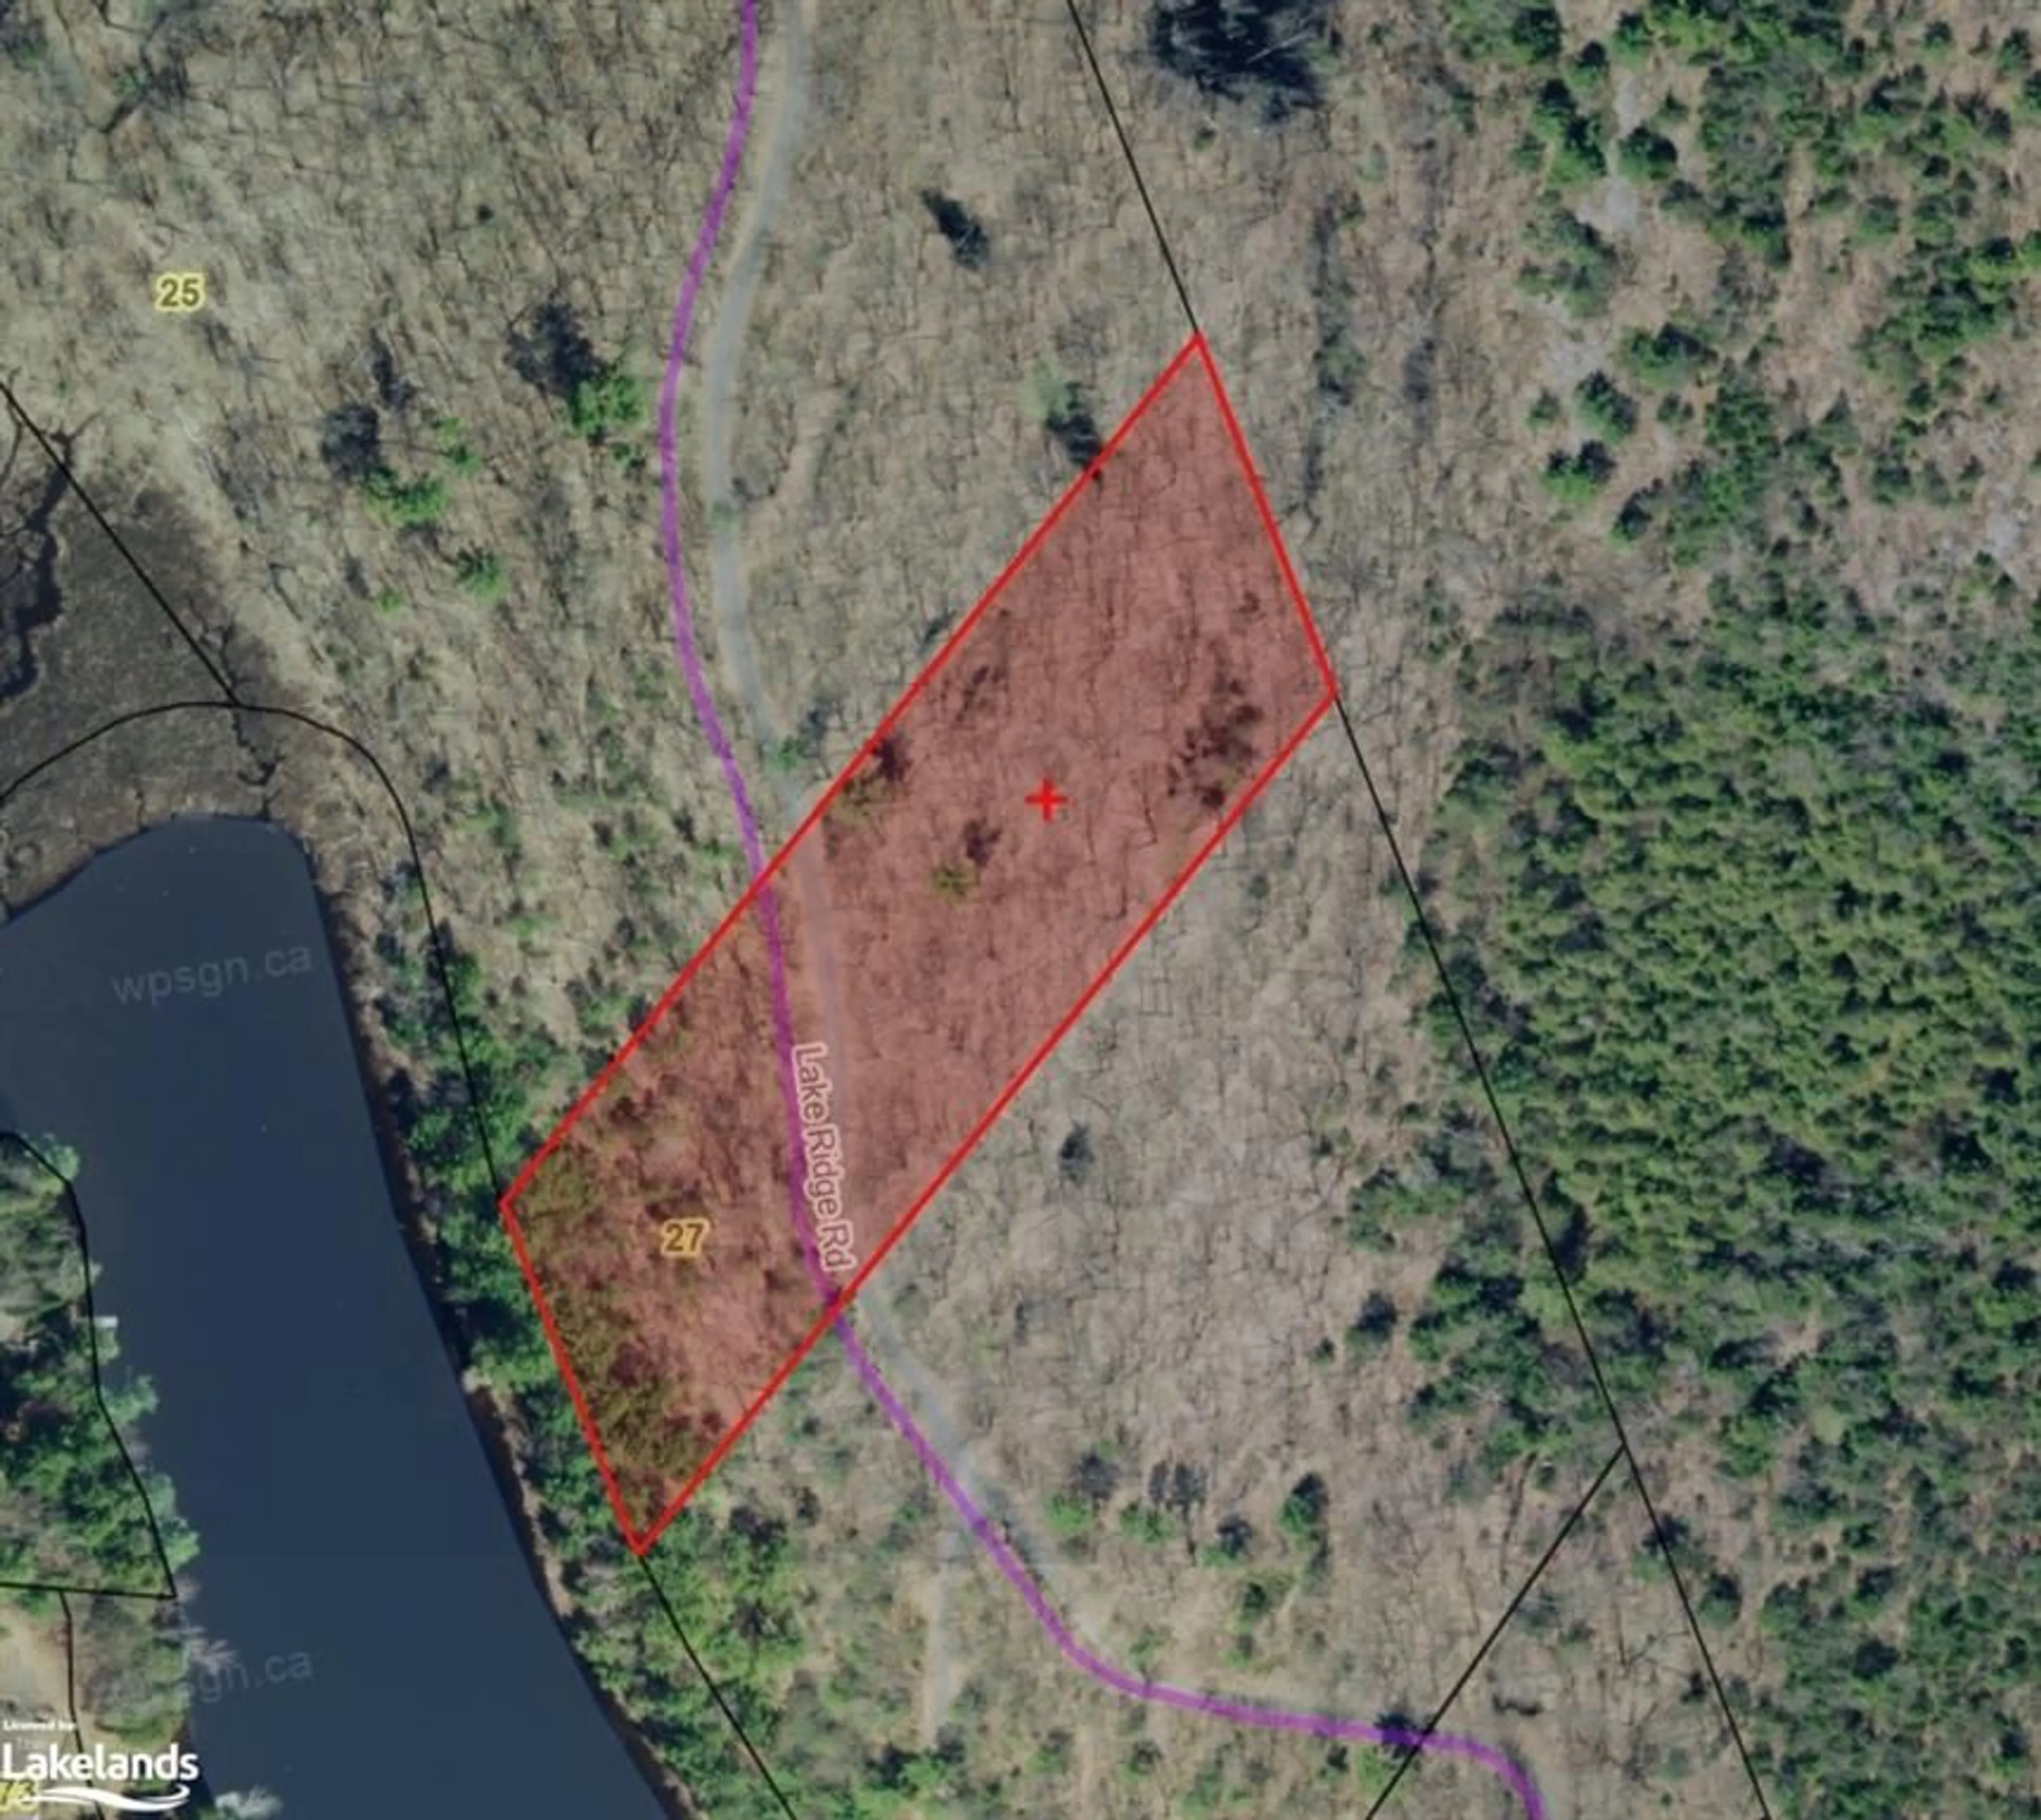 Picture of a map for 27 Lake Ridge Rd, McDougall Ontario P2A 2W9